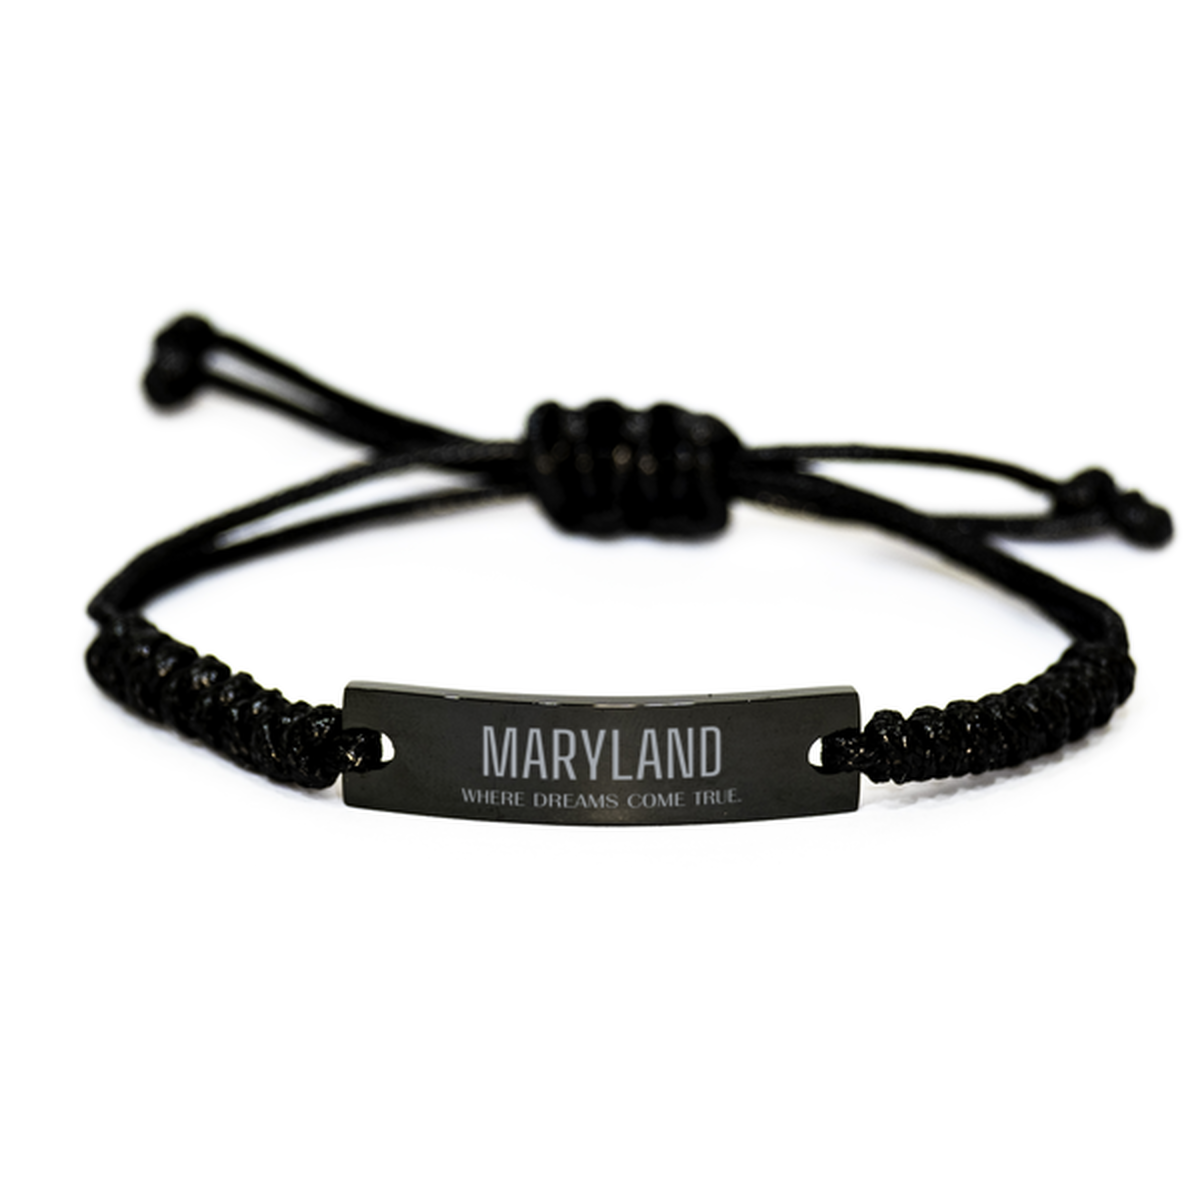 Love Maryland State Black Rope Bracelet, Maryland Where dreams come true, Birthday Inspirational Gifts For Maryland Men, Women, Friends